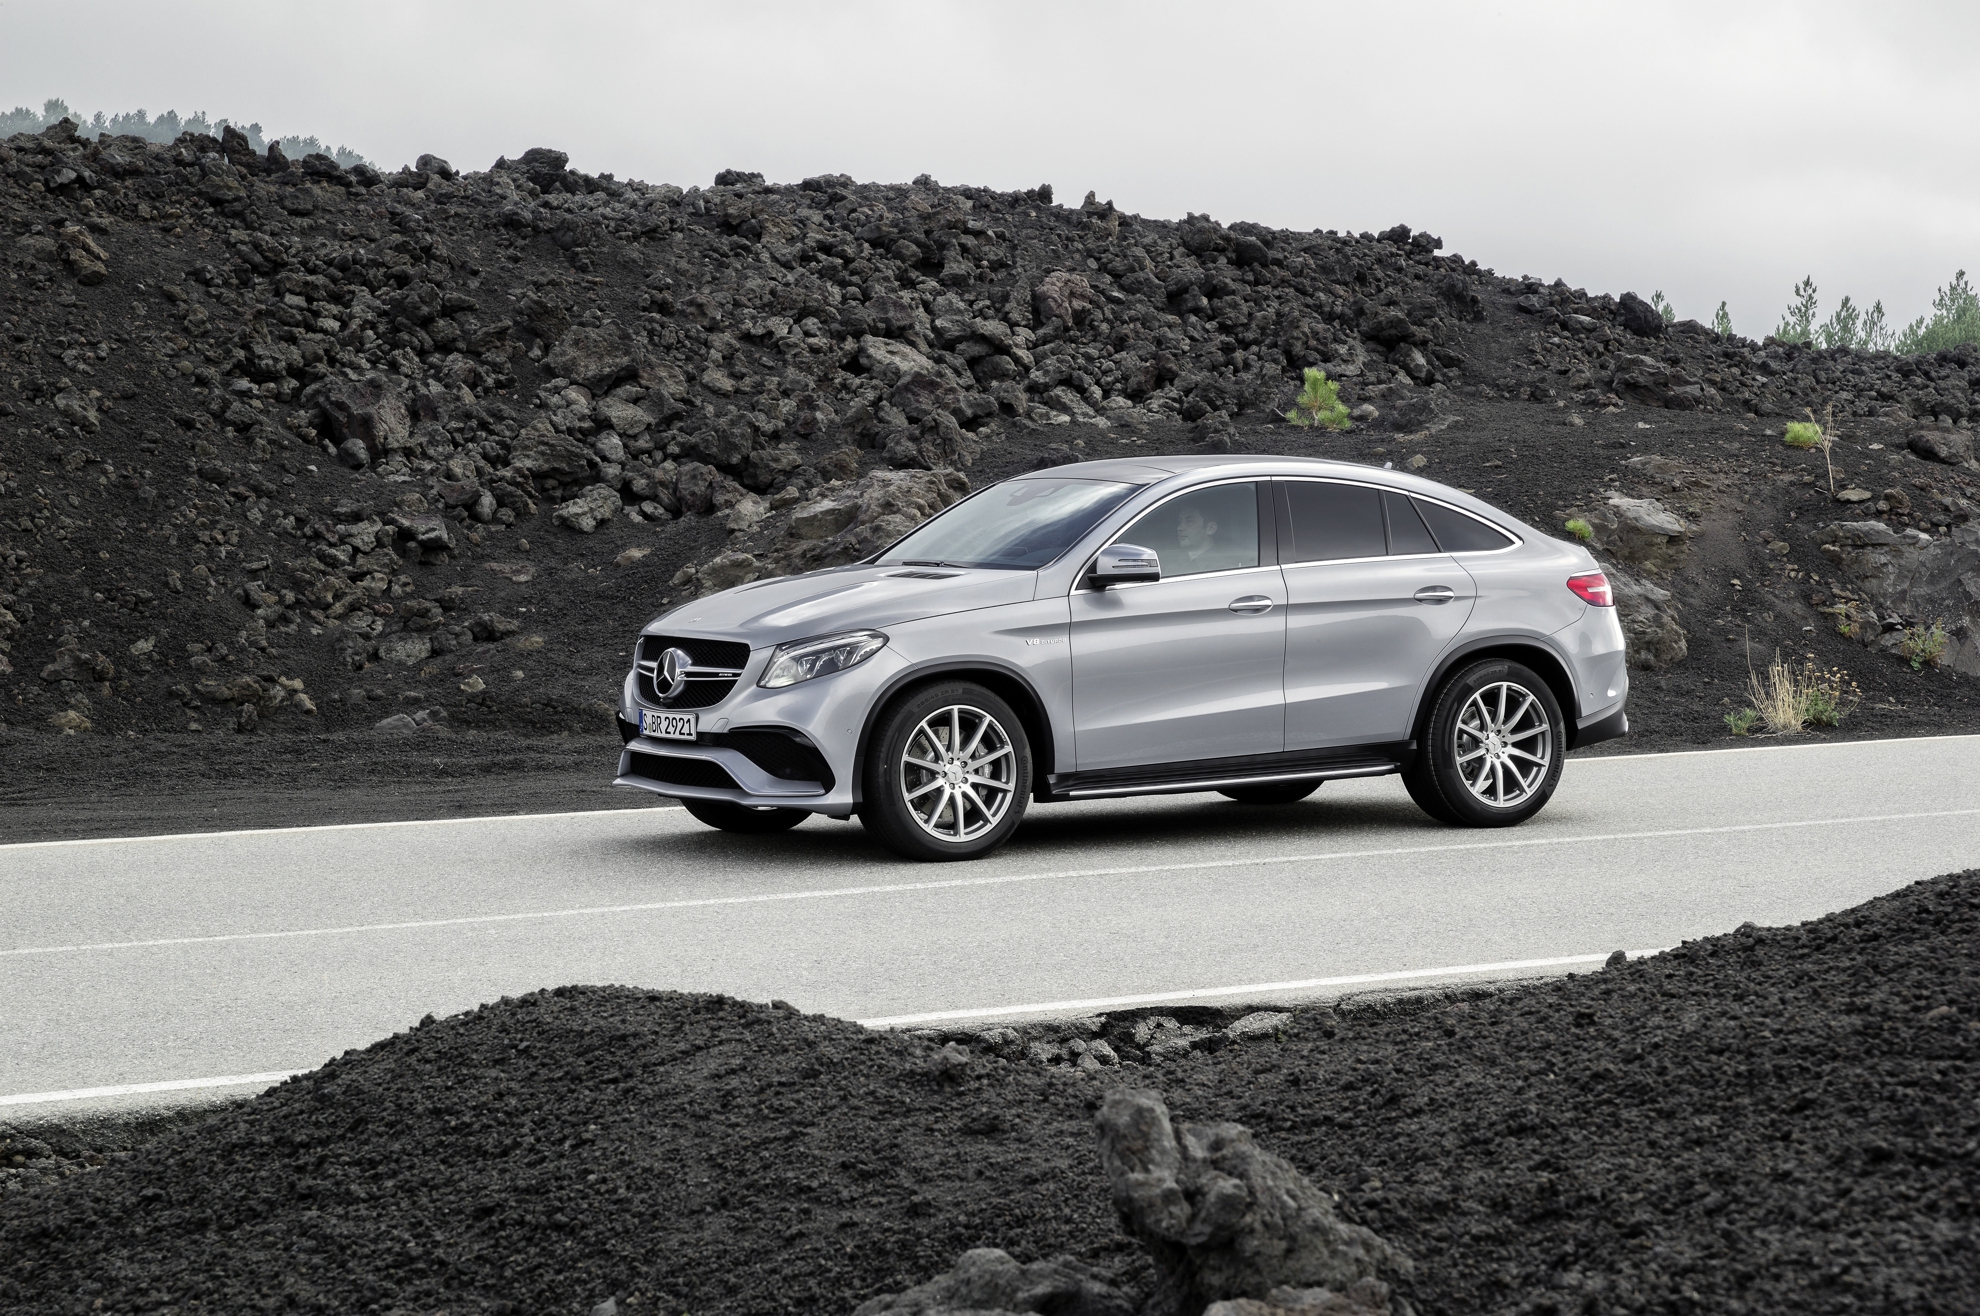 Mercedes-AMG GLE 63 Coupé 4MATIC Premiere at NAIAS 2015 in Detroit